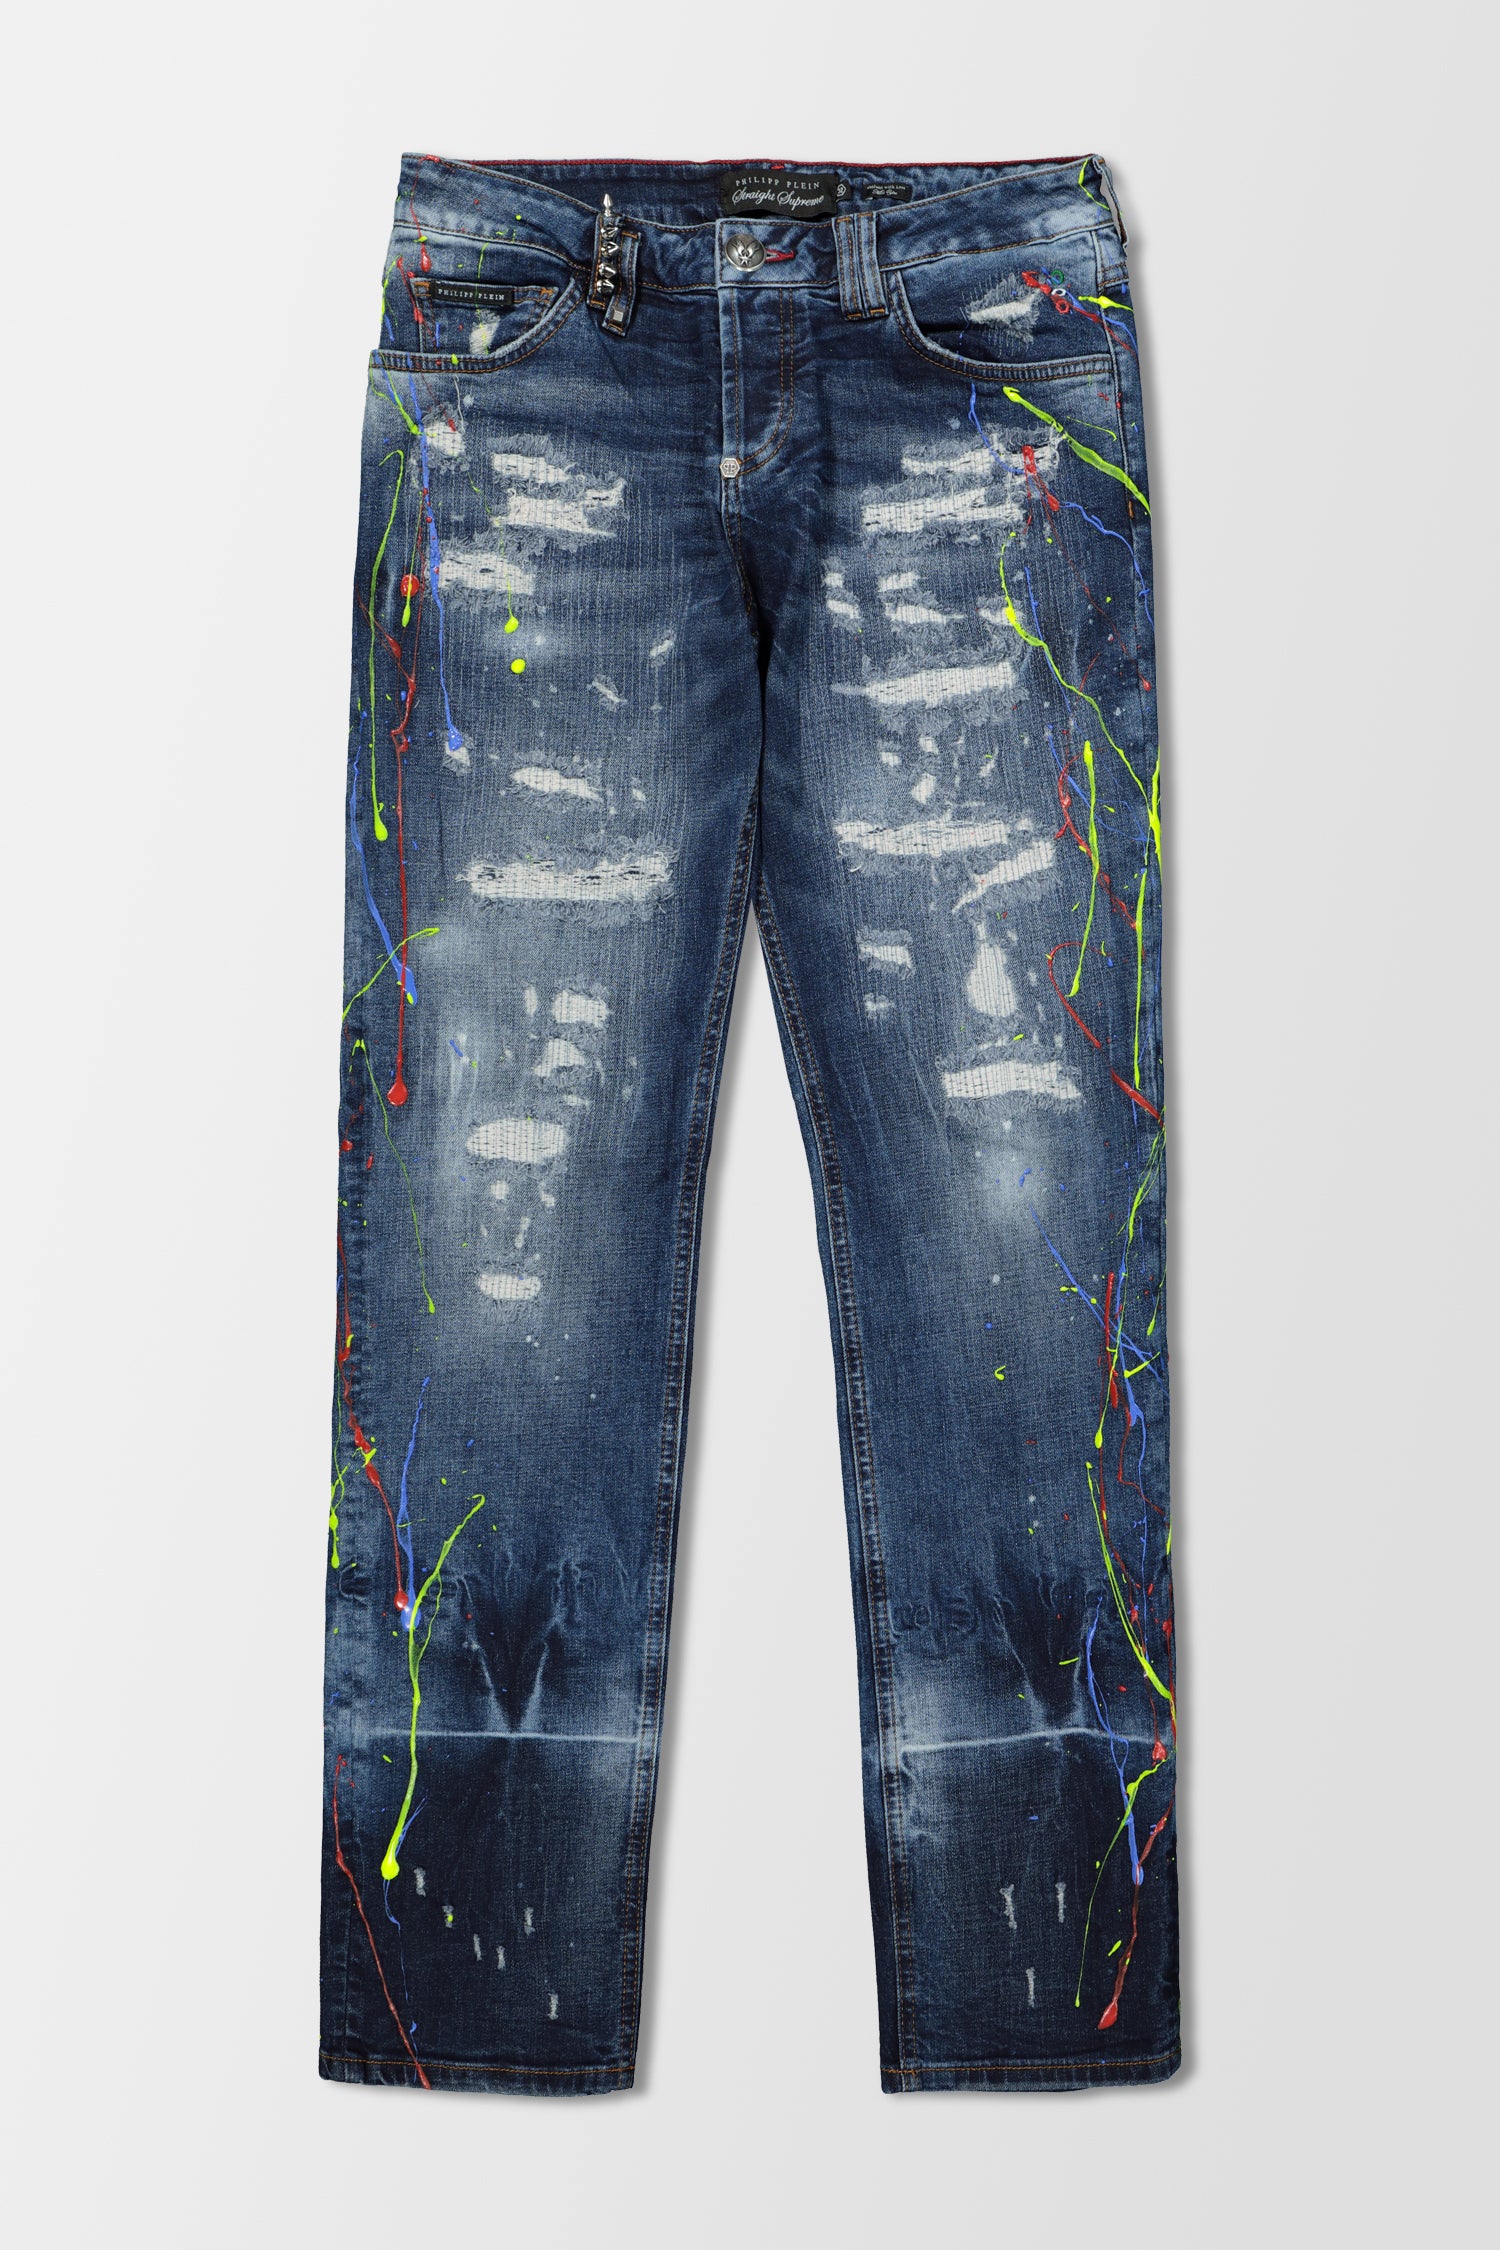 Philipp Plein Super Straight Cut Miss You Painted Jeans